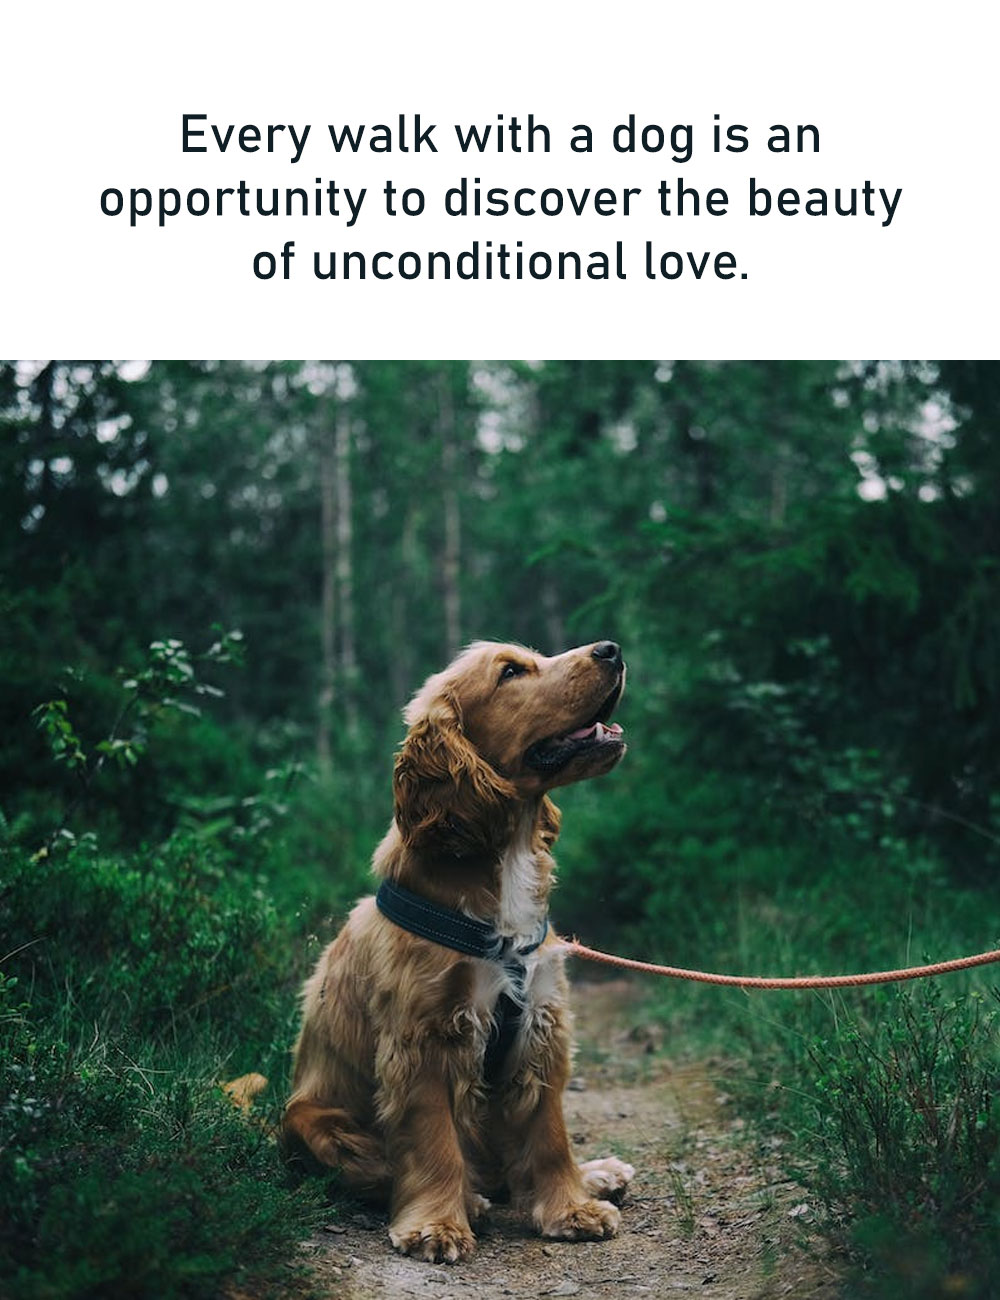 Every-walk-with-a-dog-is-an-opportunity-to-discover-the-beauty-of-unconditional-love.